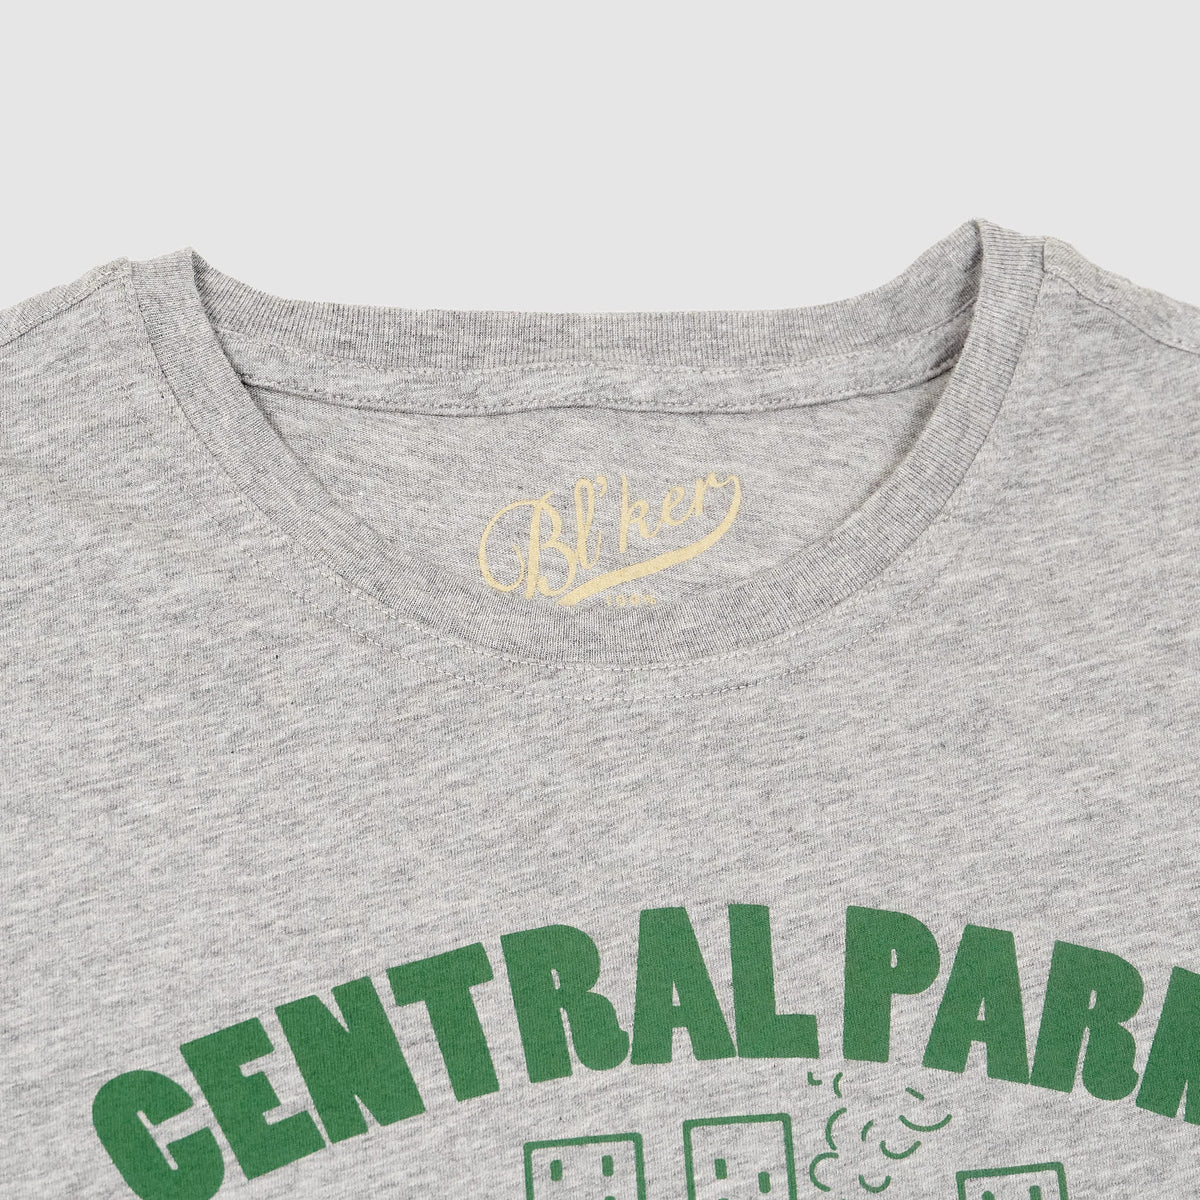 Bl&#39;ker Tee Short Sleeve Crew Neck Central Park Expedition T-Shirt